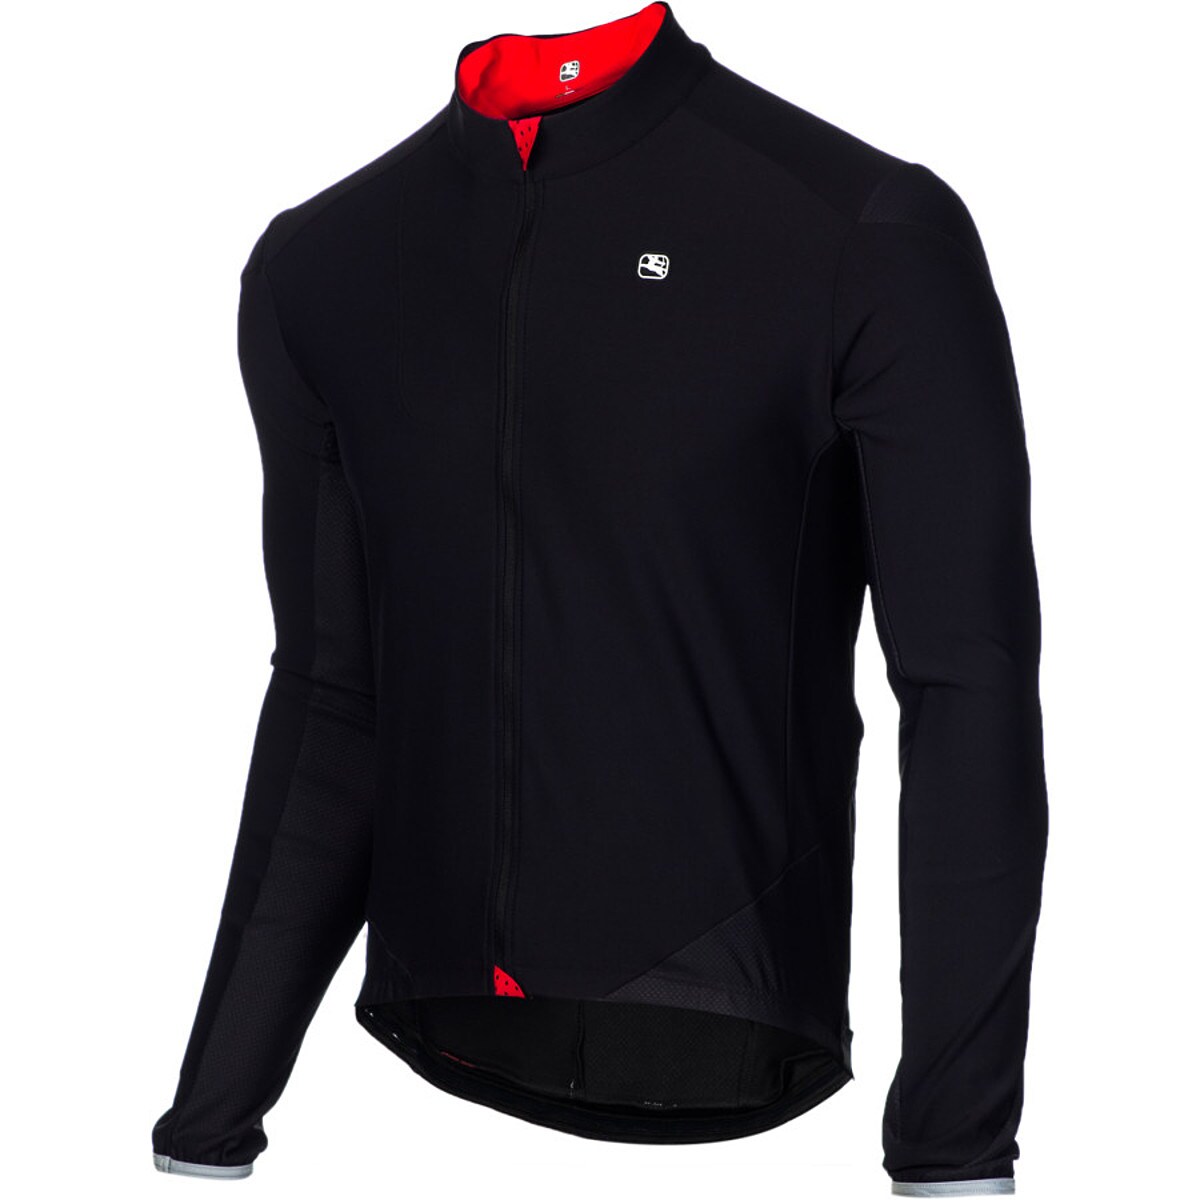 Giordana FormaRed Carbon Long Sleeve Mens Jersey